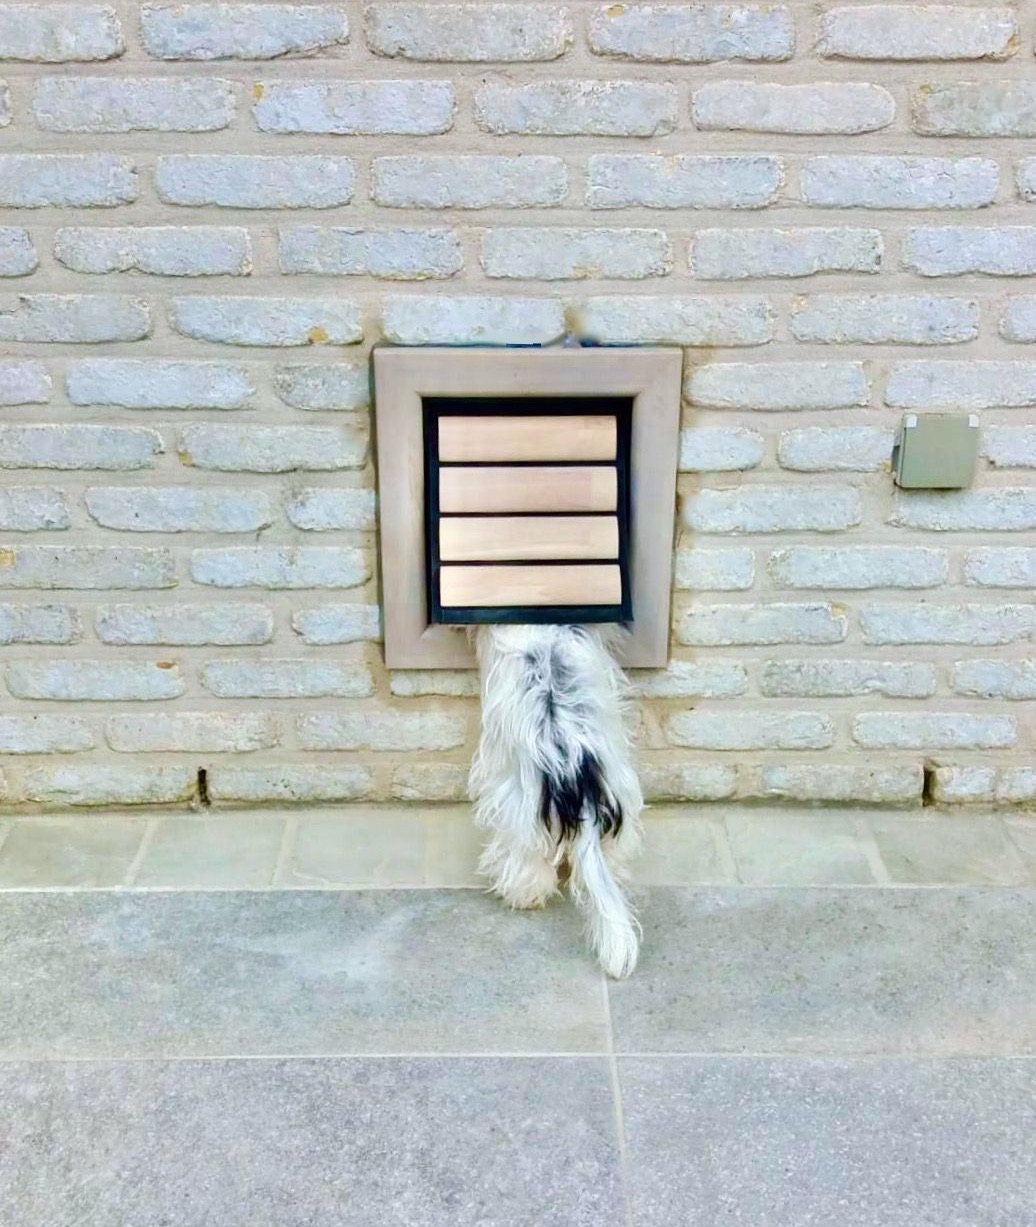 Dog Flap | Dog Door | Nipper (Small) Grey wooden dog door for small dogs installed in a grey brick wall | © Tomsgates